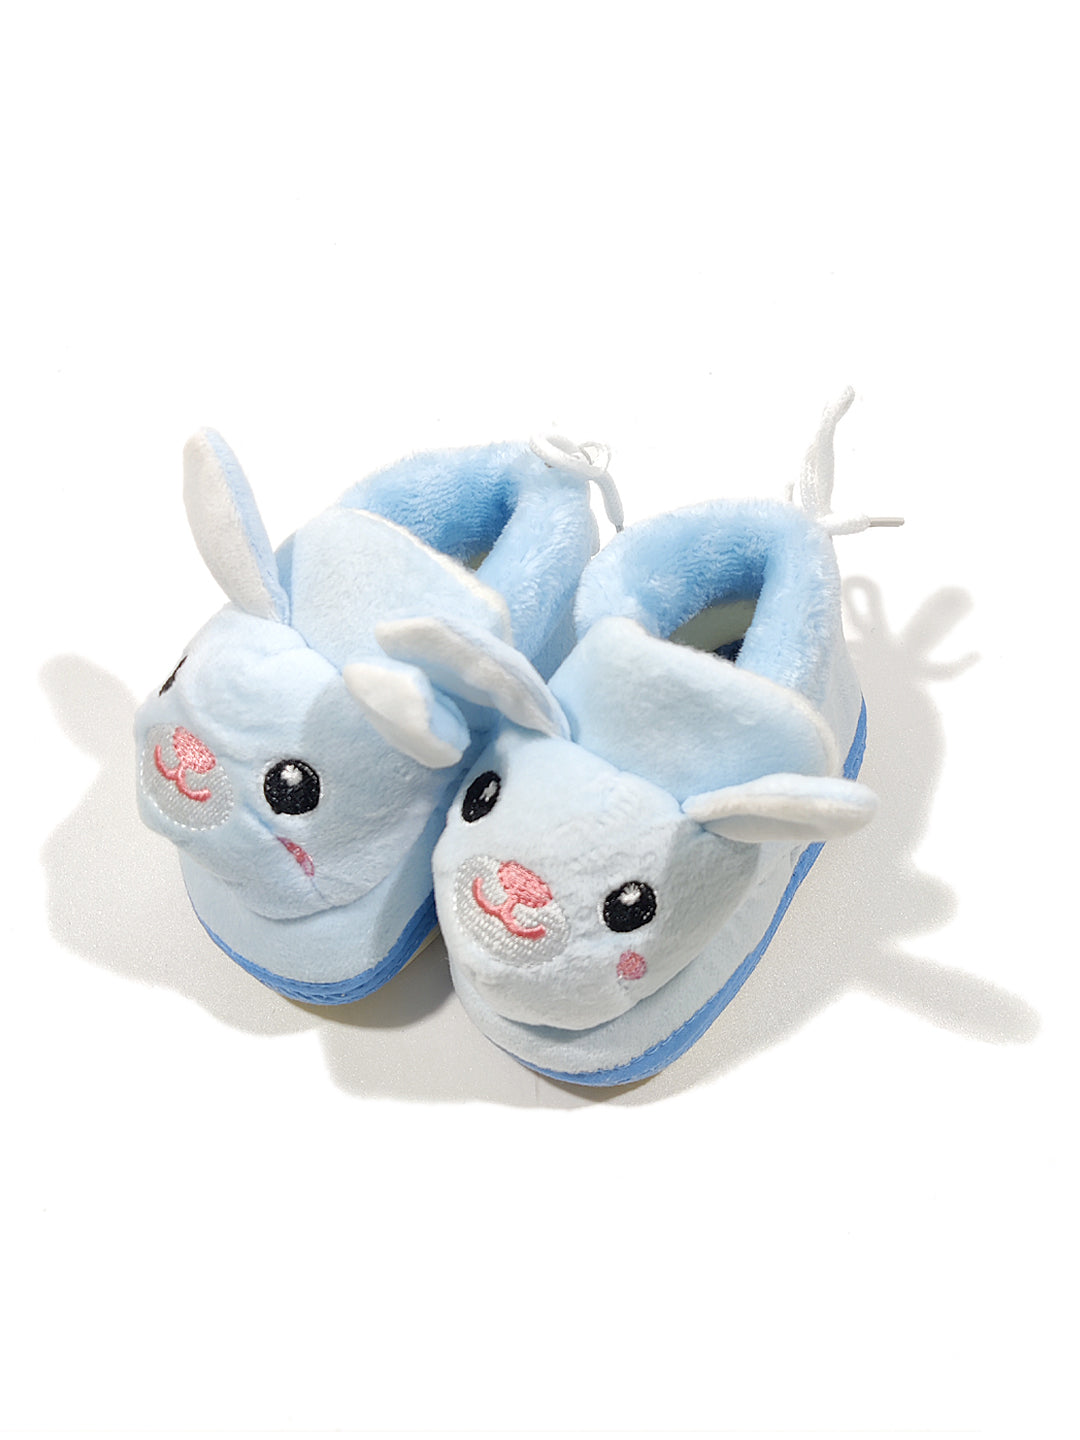 Footprints Soft First Walking Shoes For Unisex Baby Bootie with Rubber, Blue Rabit 6-9 Months